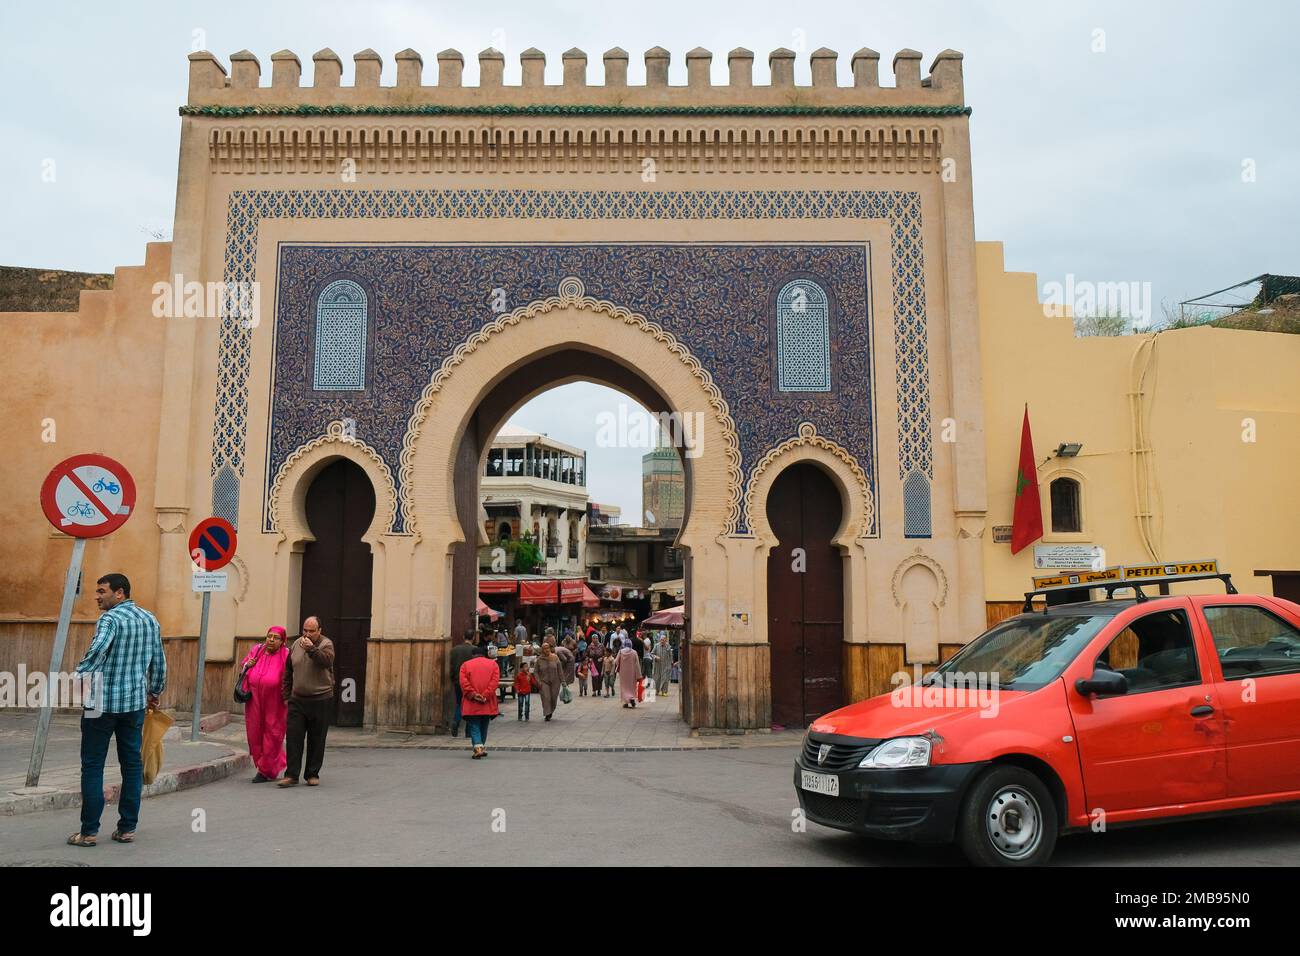 Fez, Morocco - grand city gate Bab Bou Jeloud in Fes el Bali. Monumental French entrance. Red petit taxi parked outside the ancient medina. Fes landmark. Stock Photo